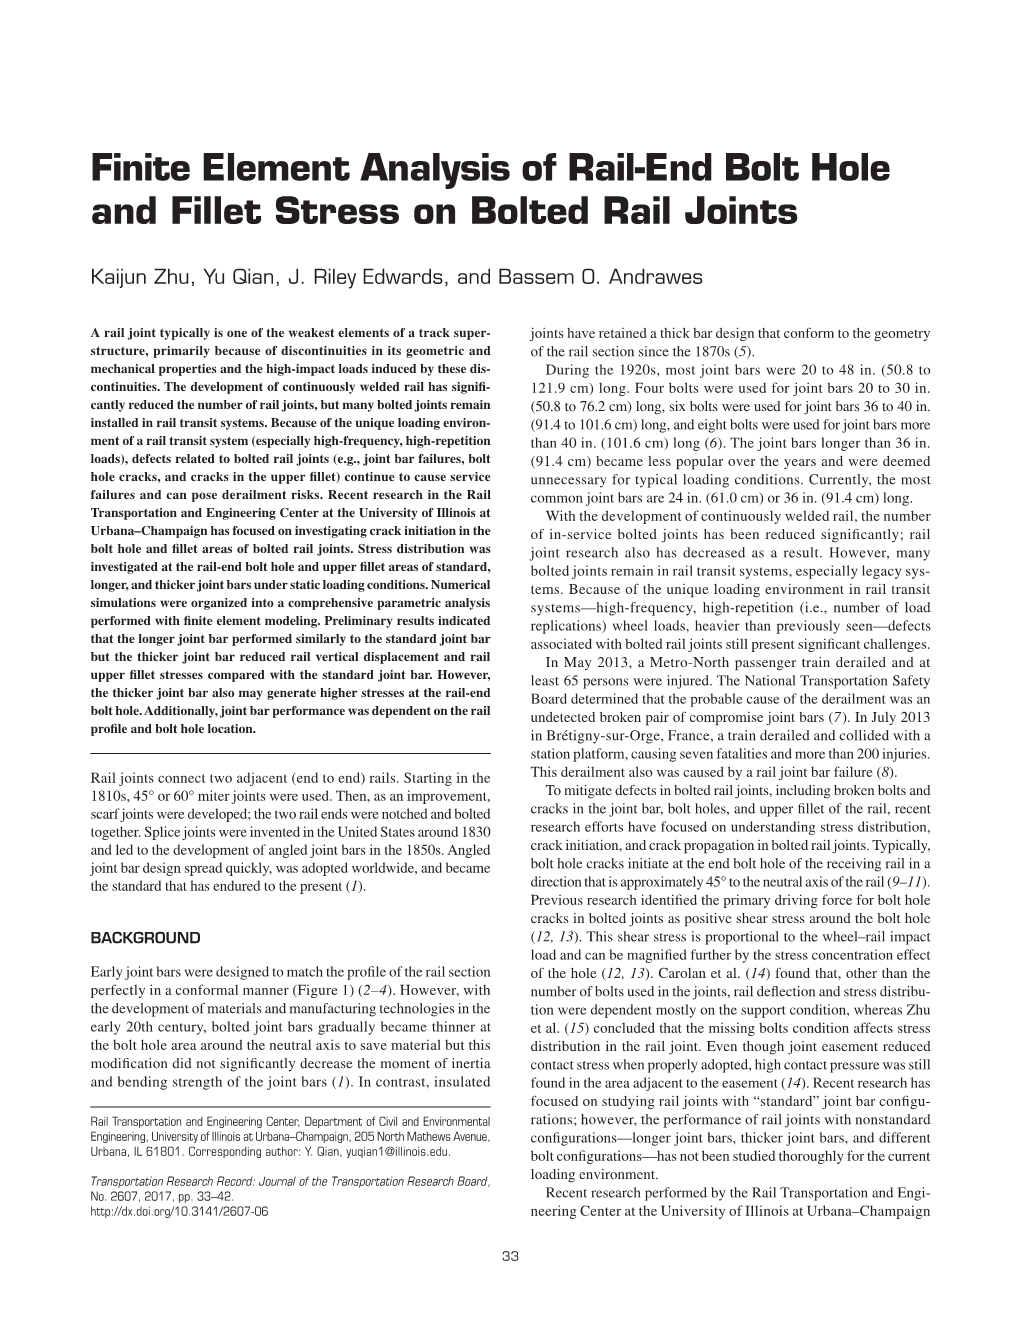 Finite Element Analysis of Rail-End Bolt Hole and Fillet Stress on Bolted Rail Joints